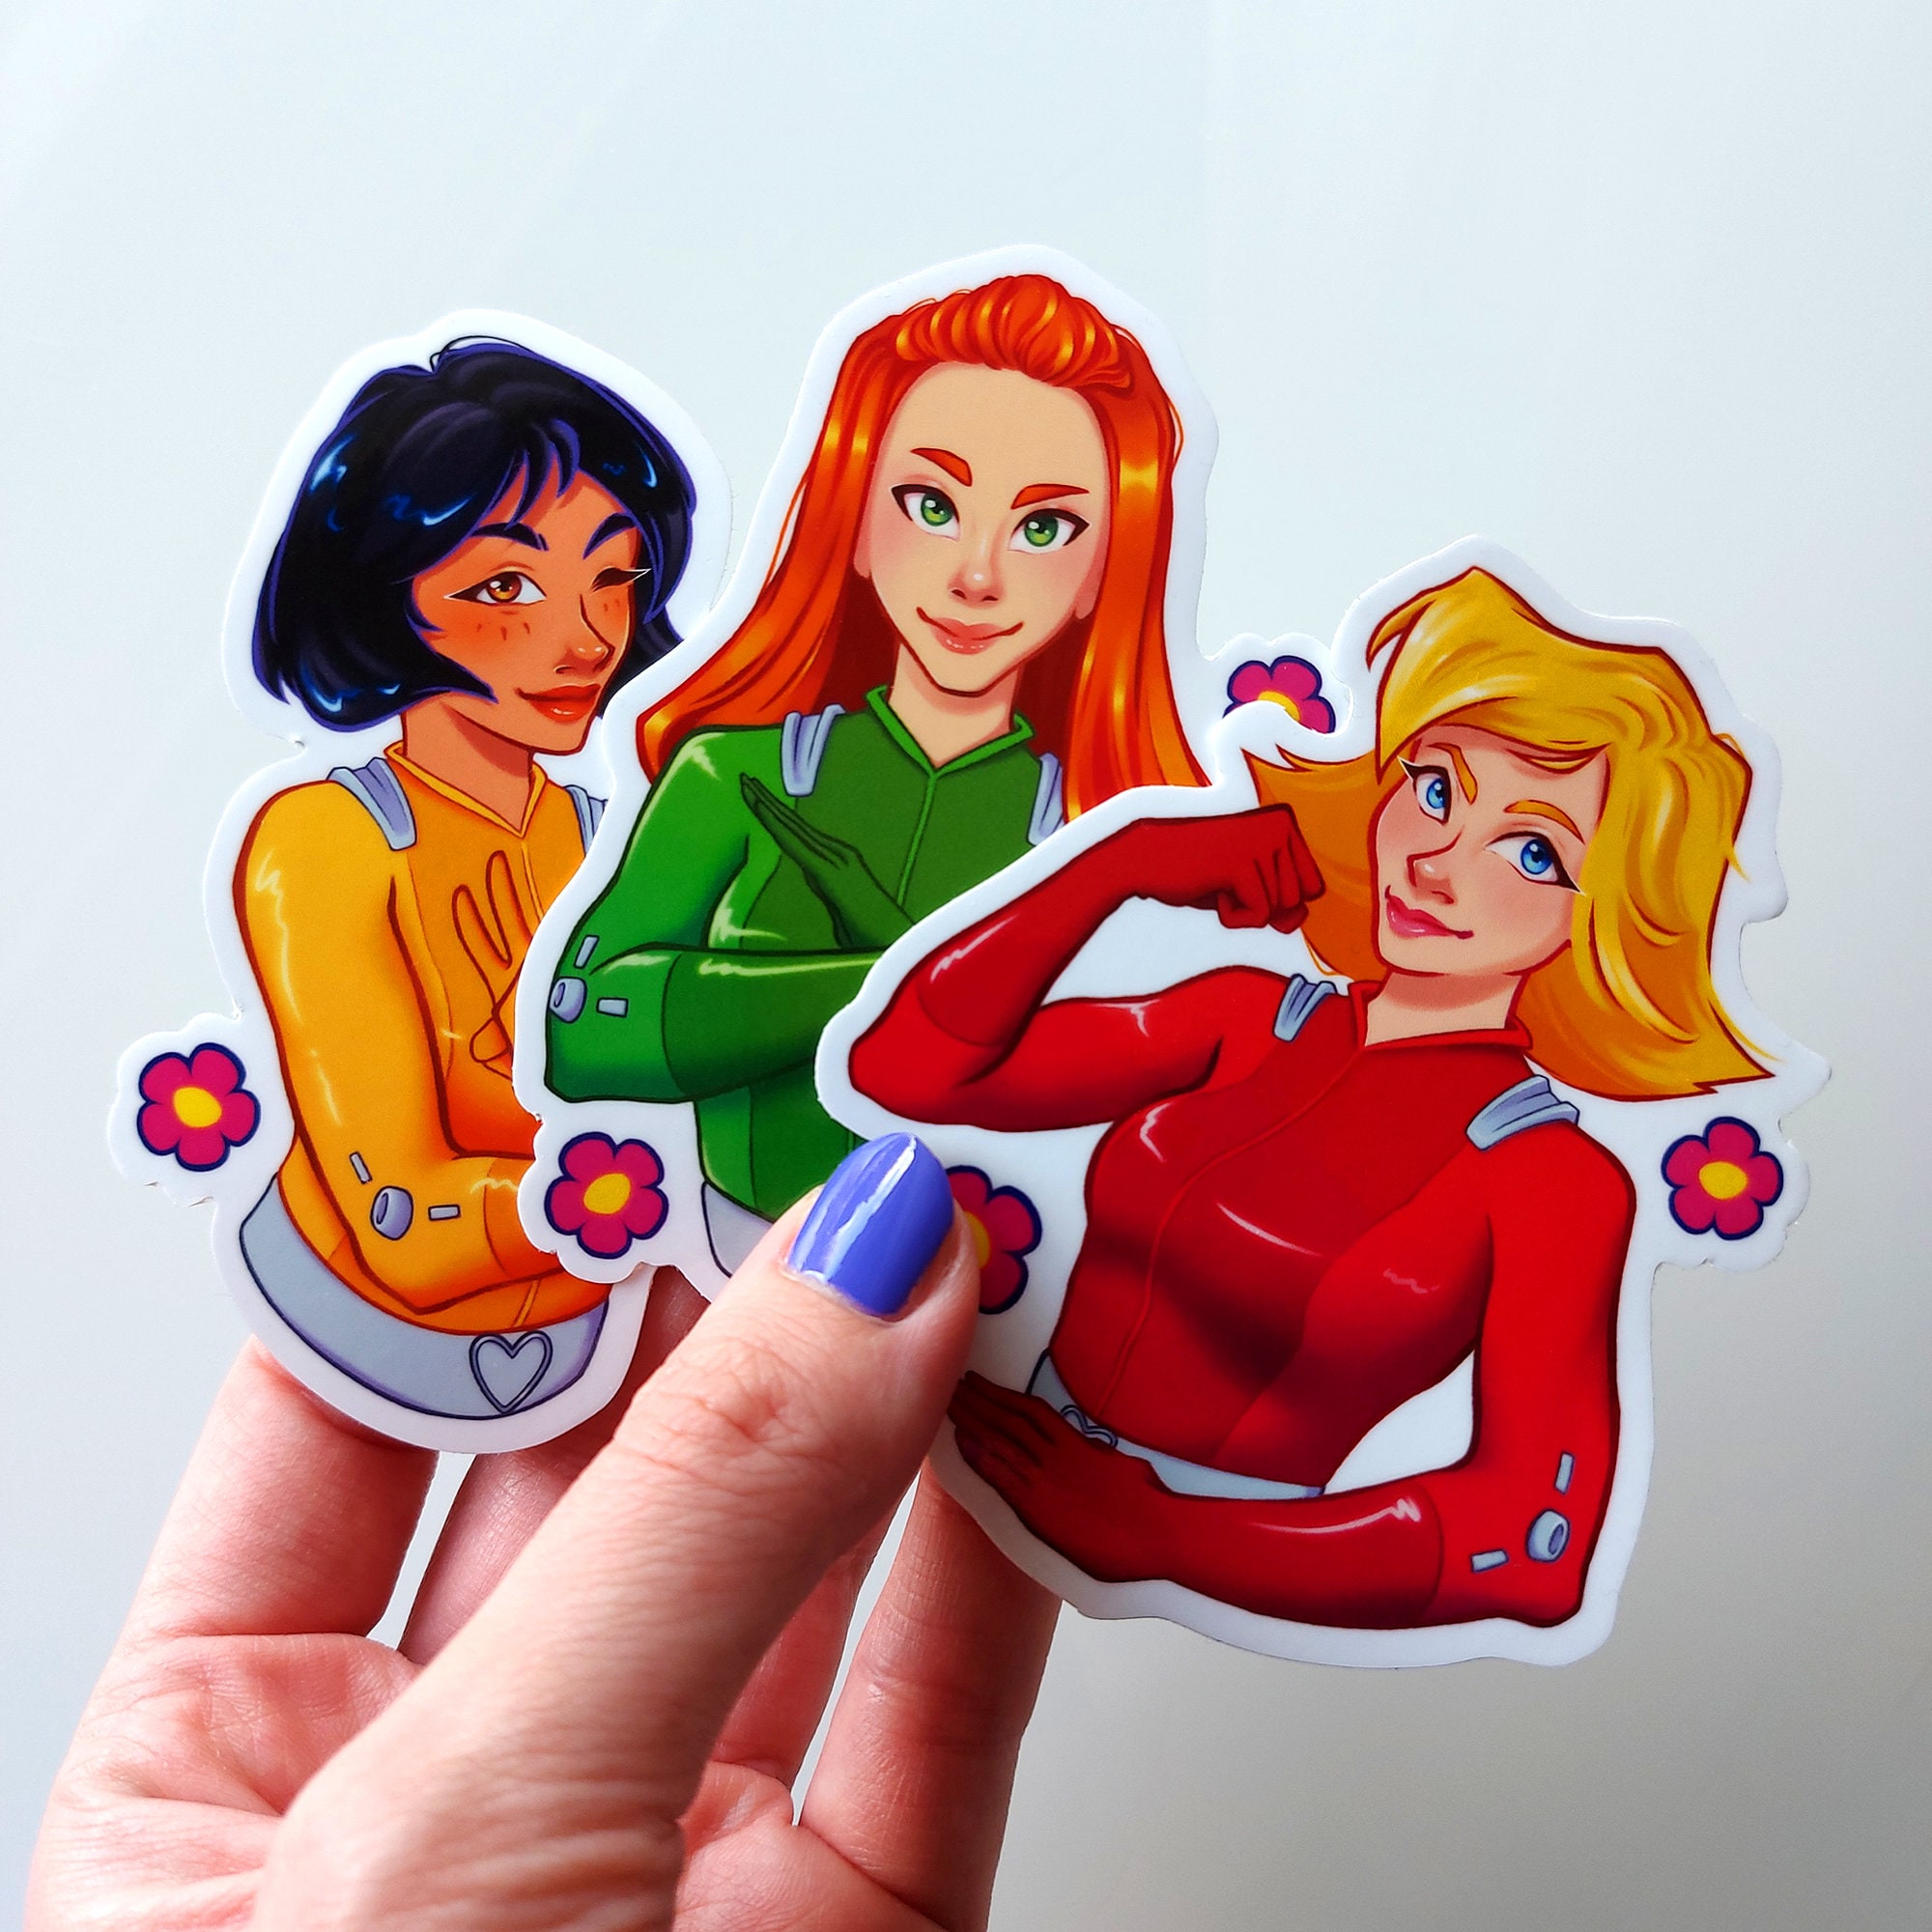 darla adkins share alex from totally spies having sex photos